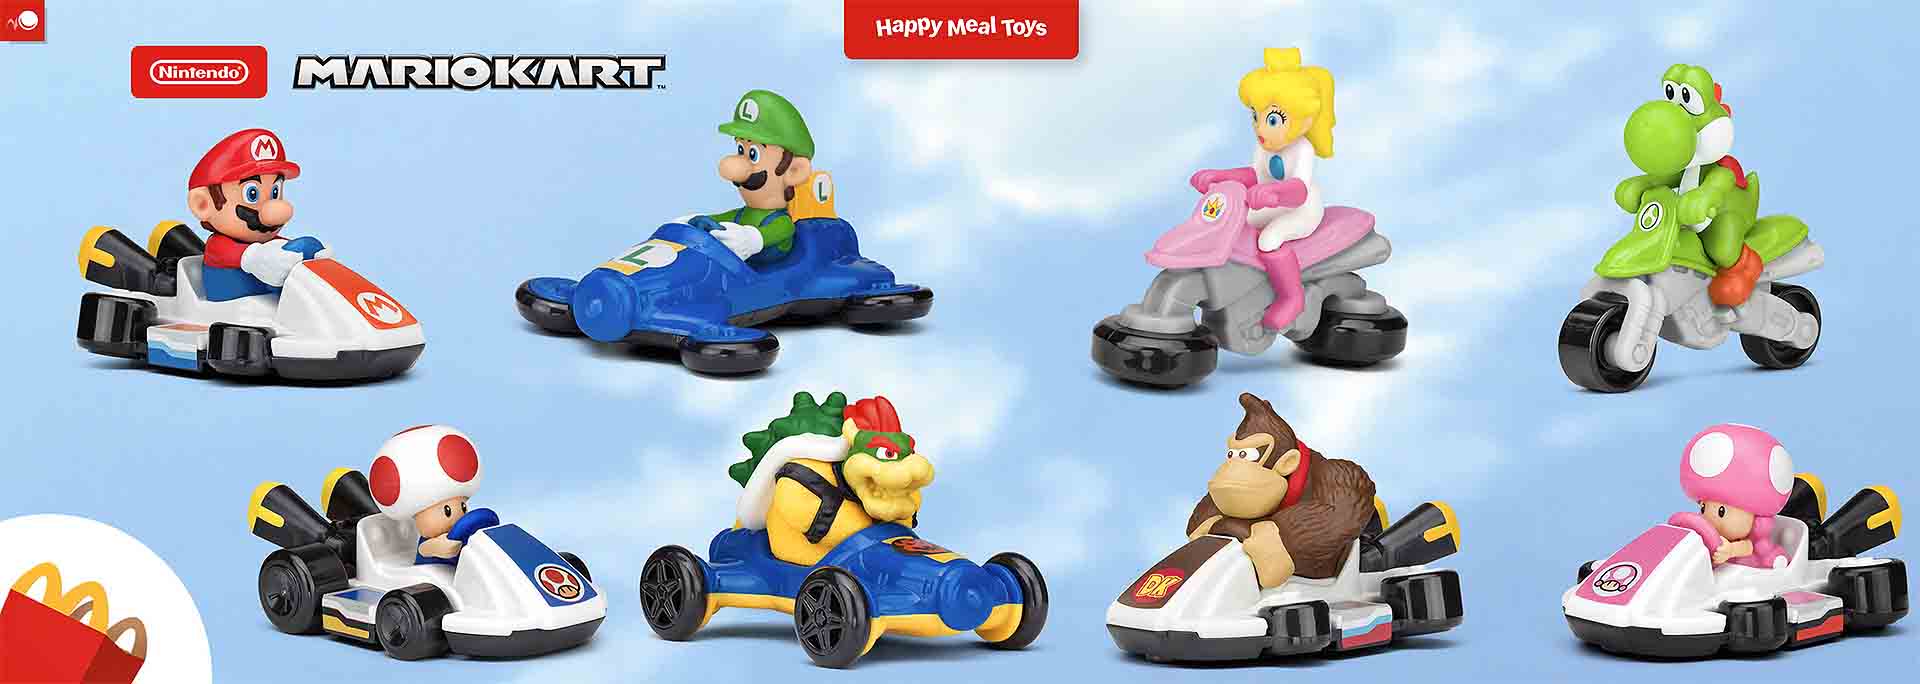 Mario Kart toys are now available in US McDonald’s Happy Meals